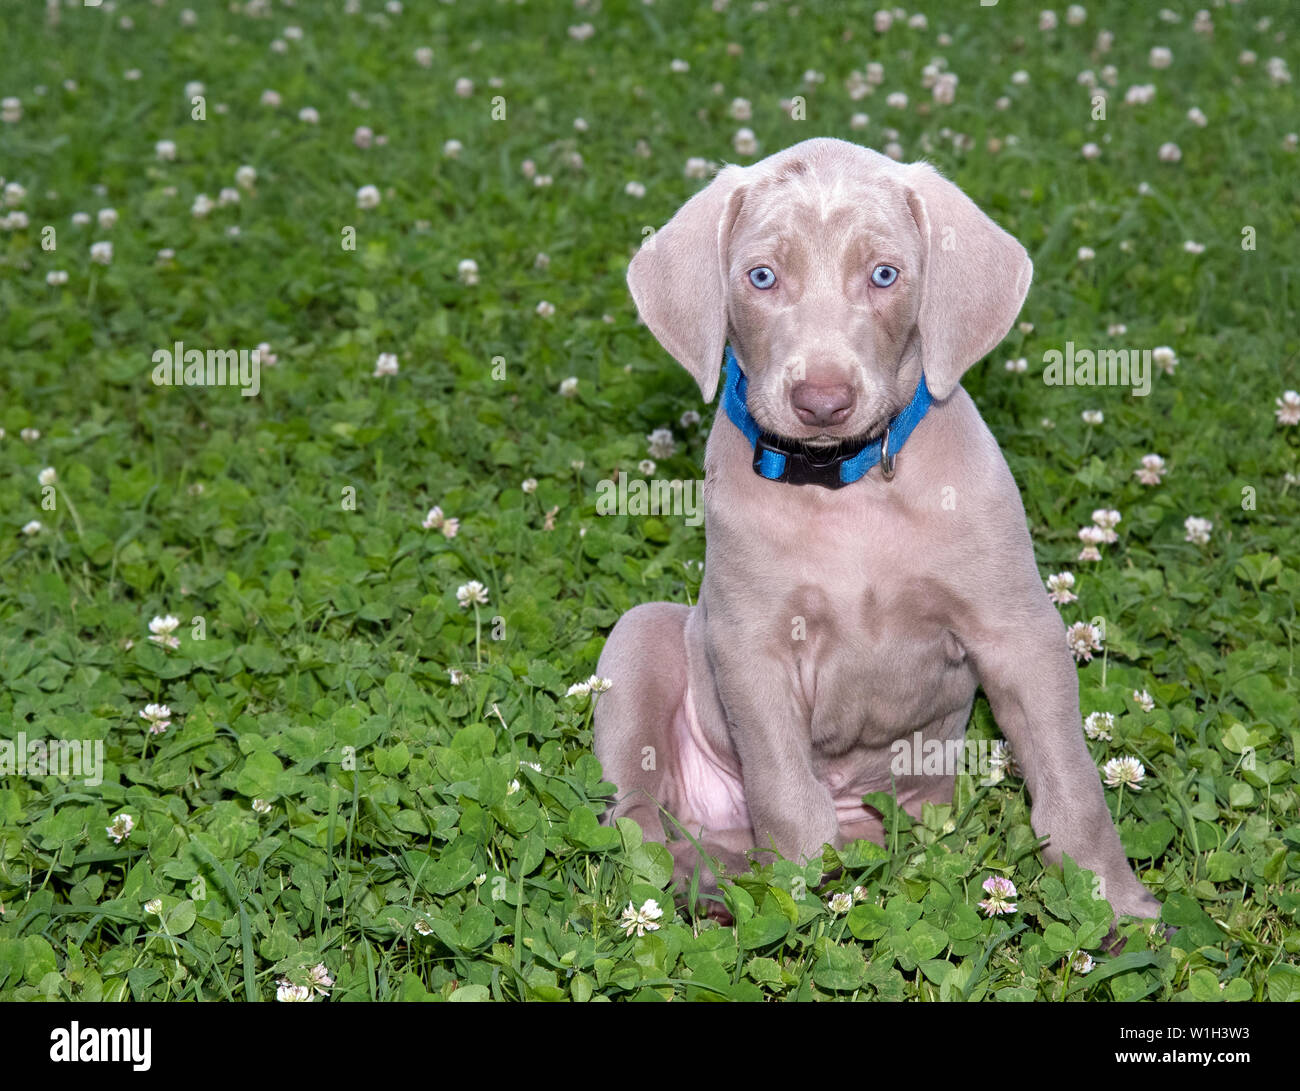 Adorable Weimaraner puppy sitting in a field of clover Stock Photo